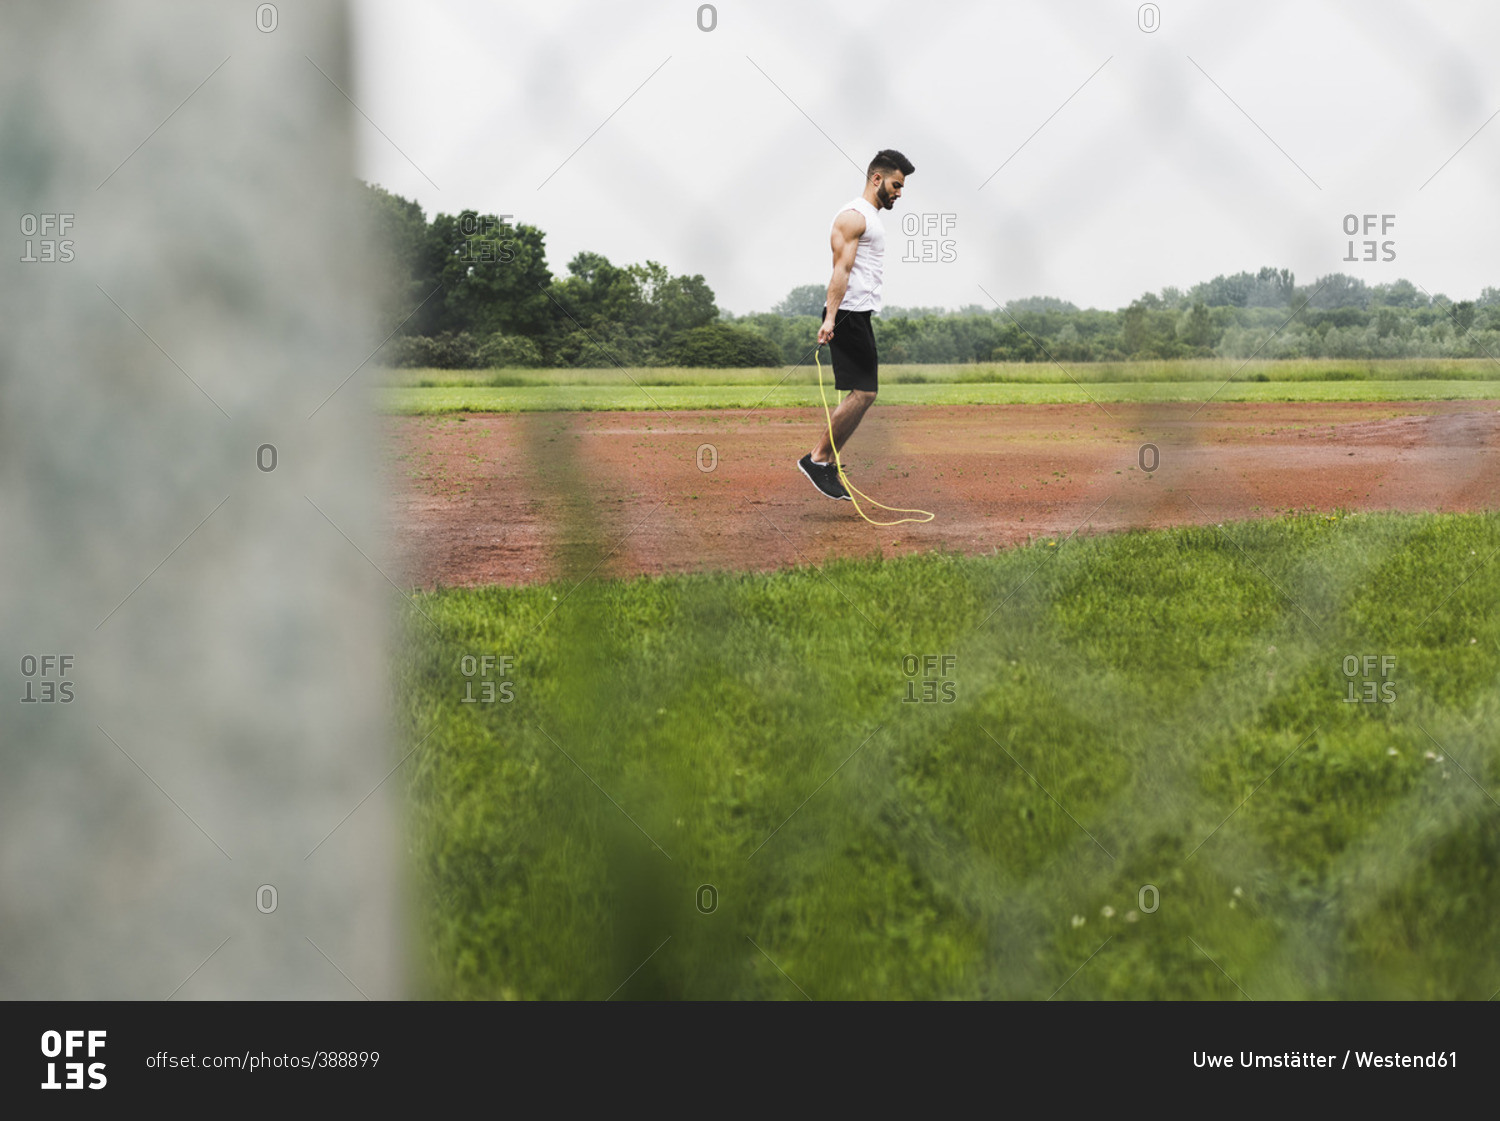 Athlete skipping rope on sports field